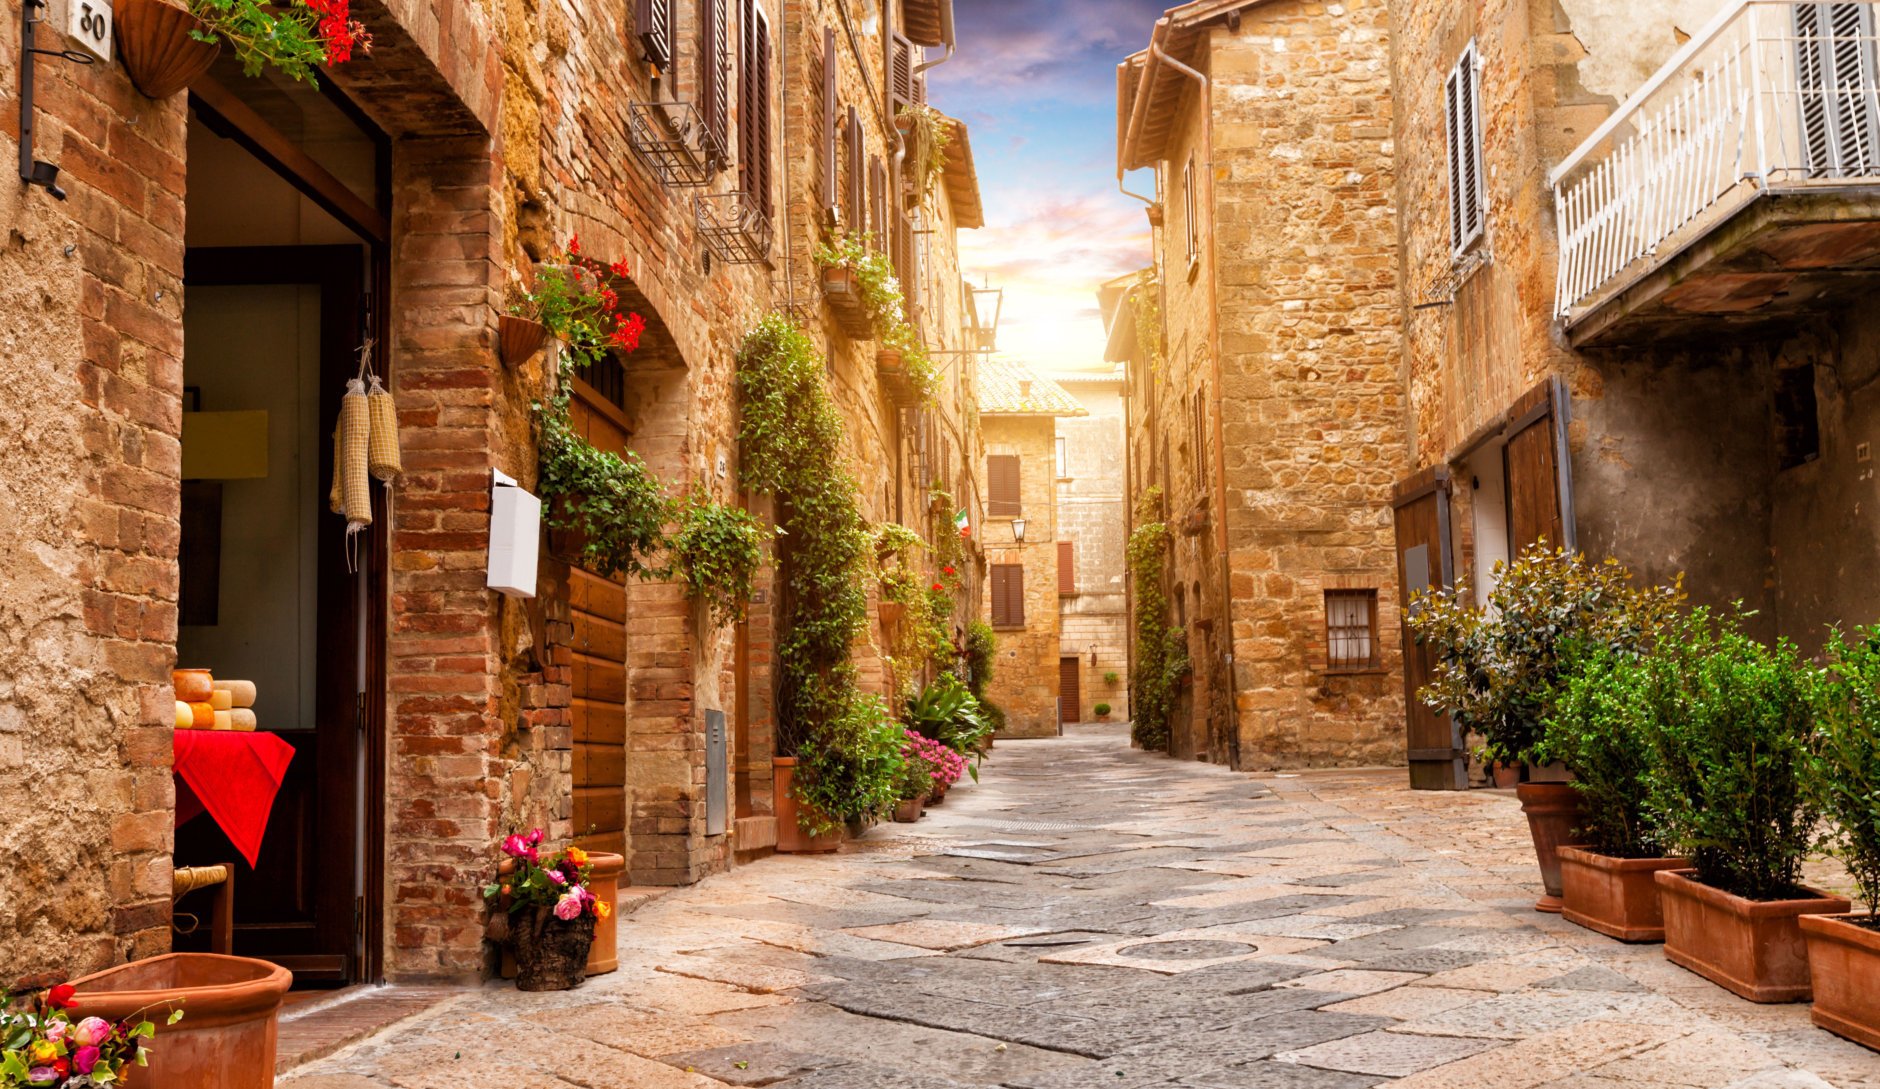 Colorful street in Pienza with many decoration flowers and trees, Tuscany, Italy